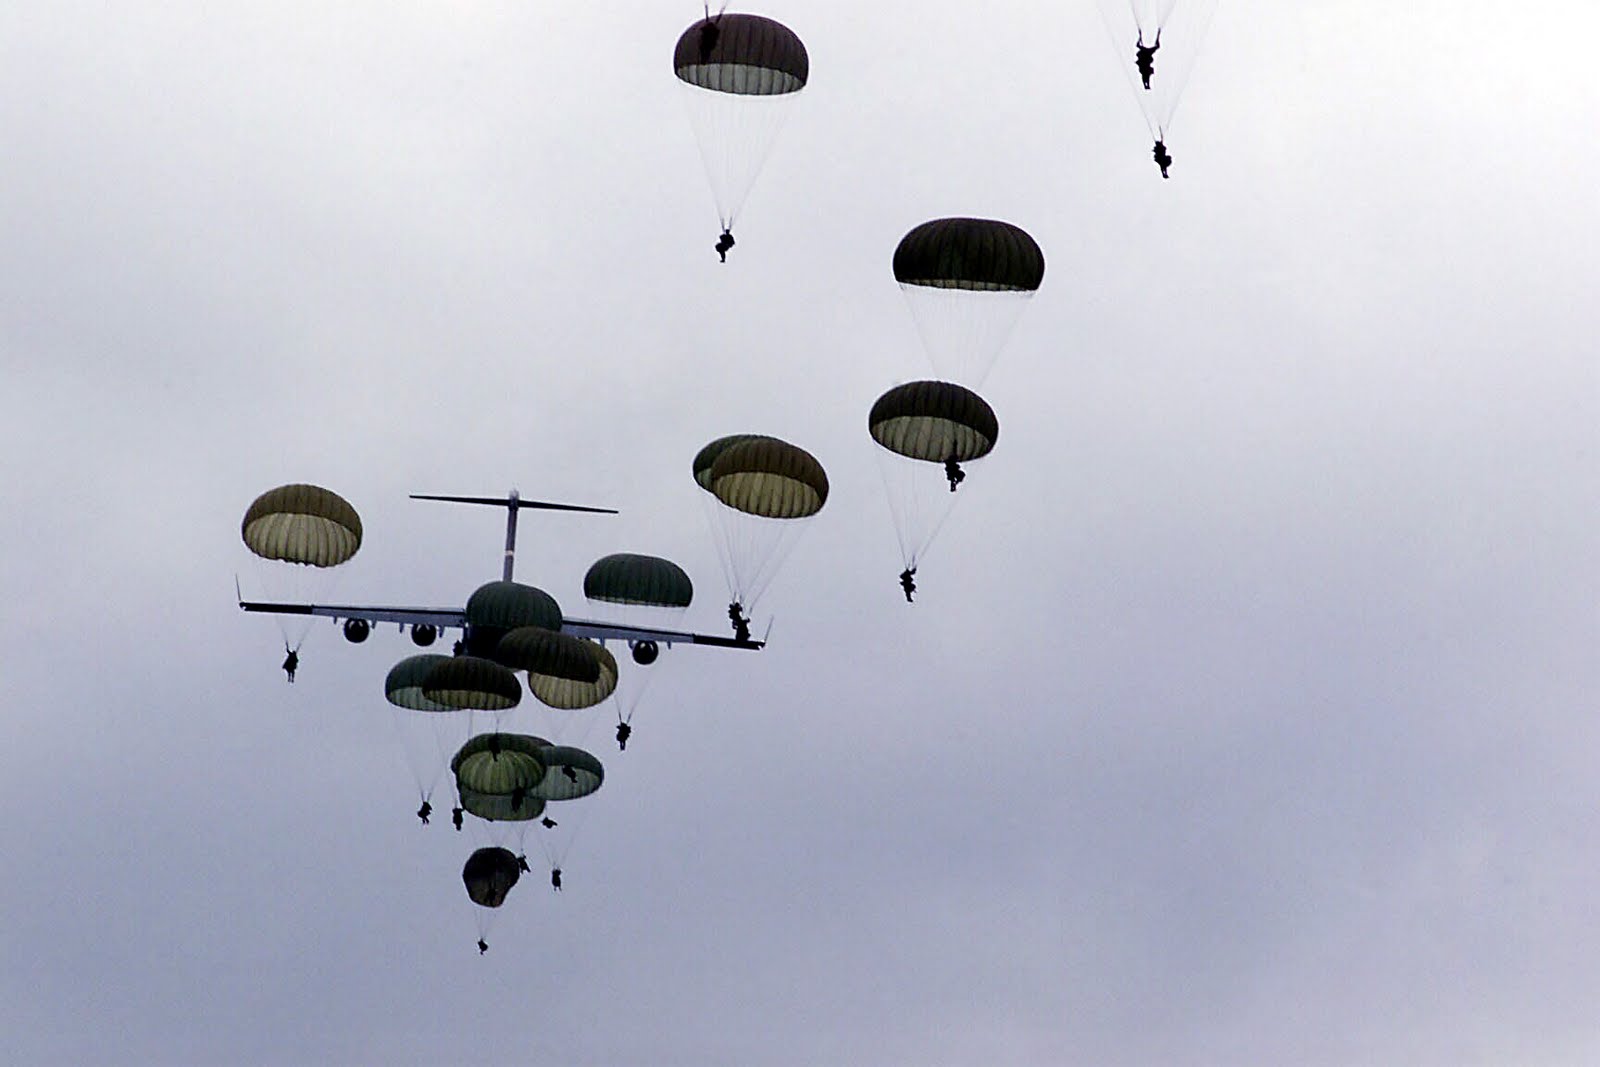 Us Army Airborne The Image